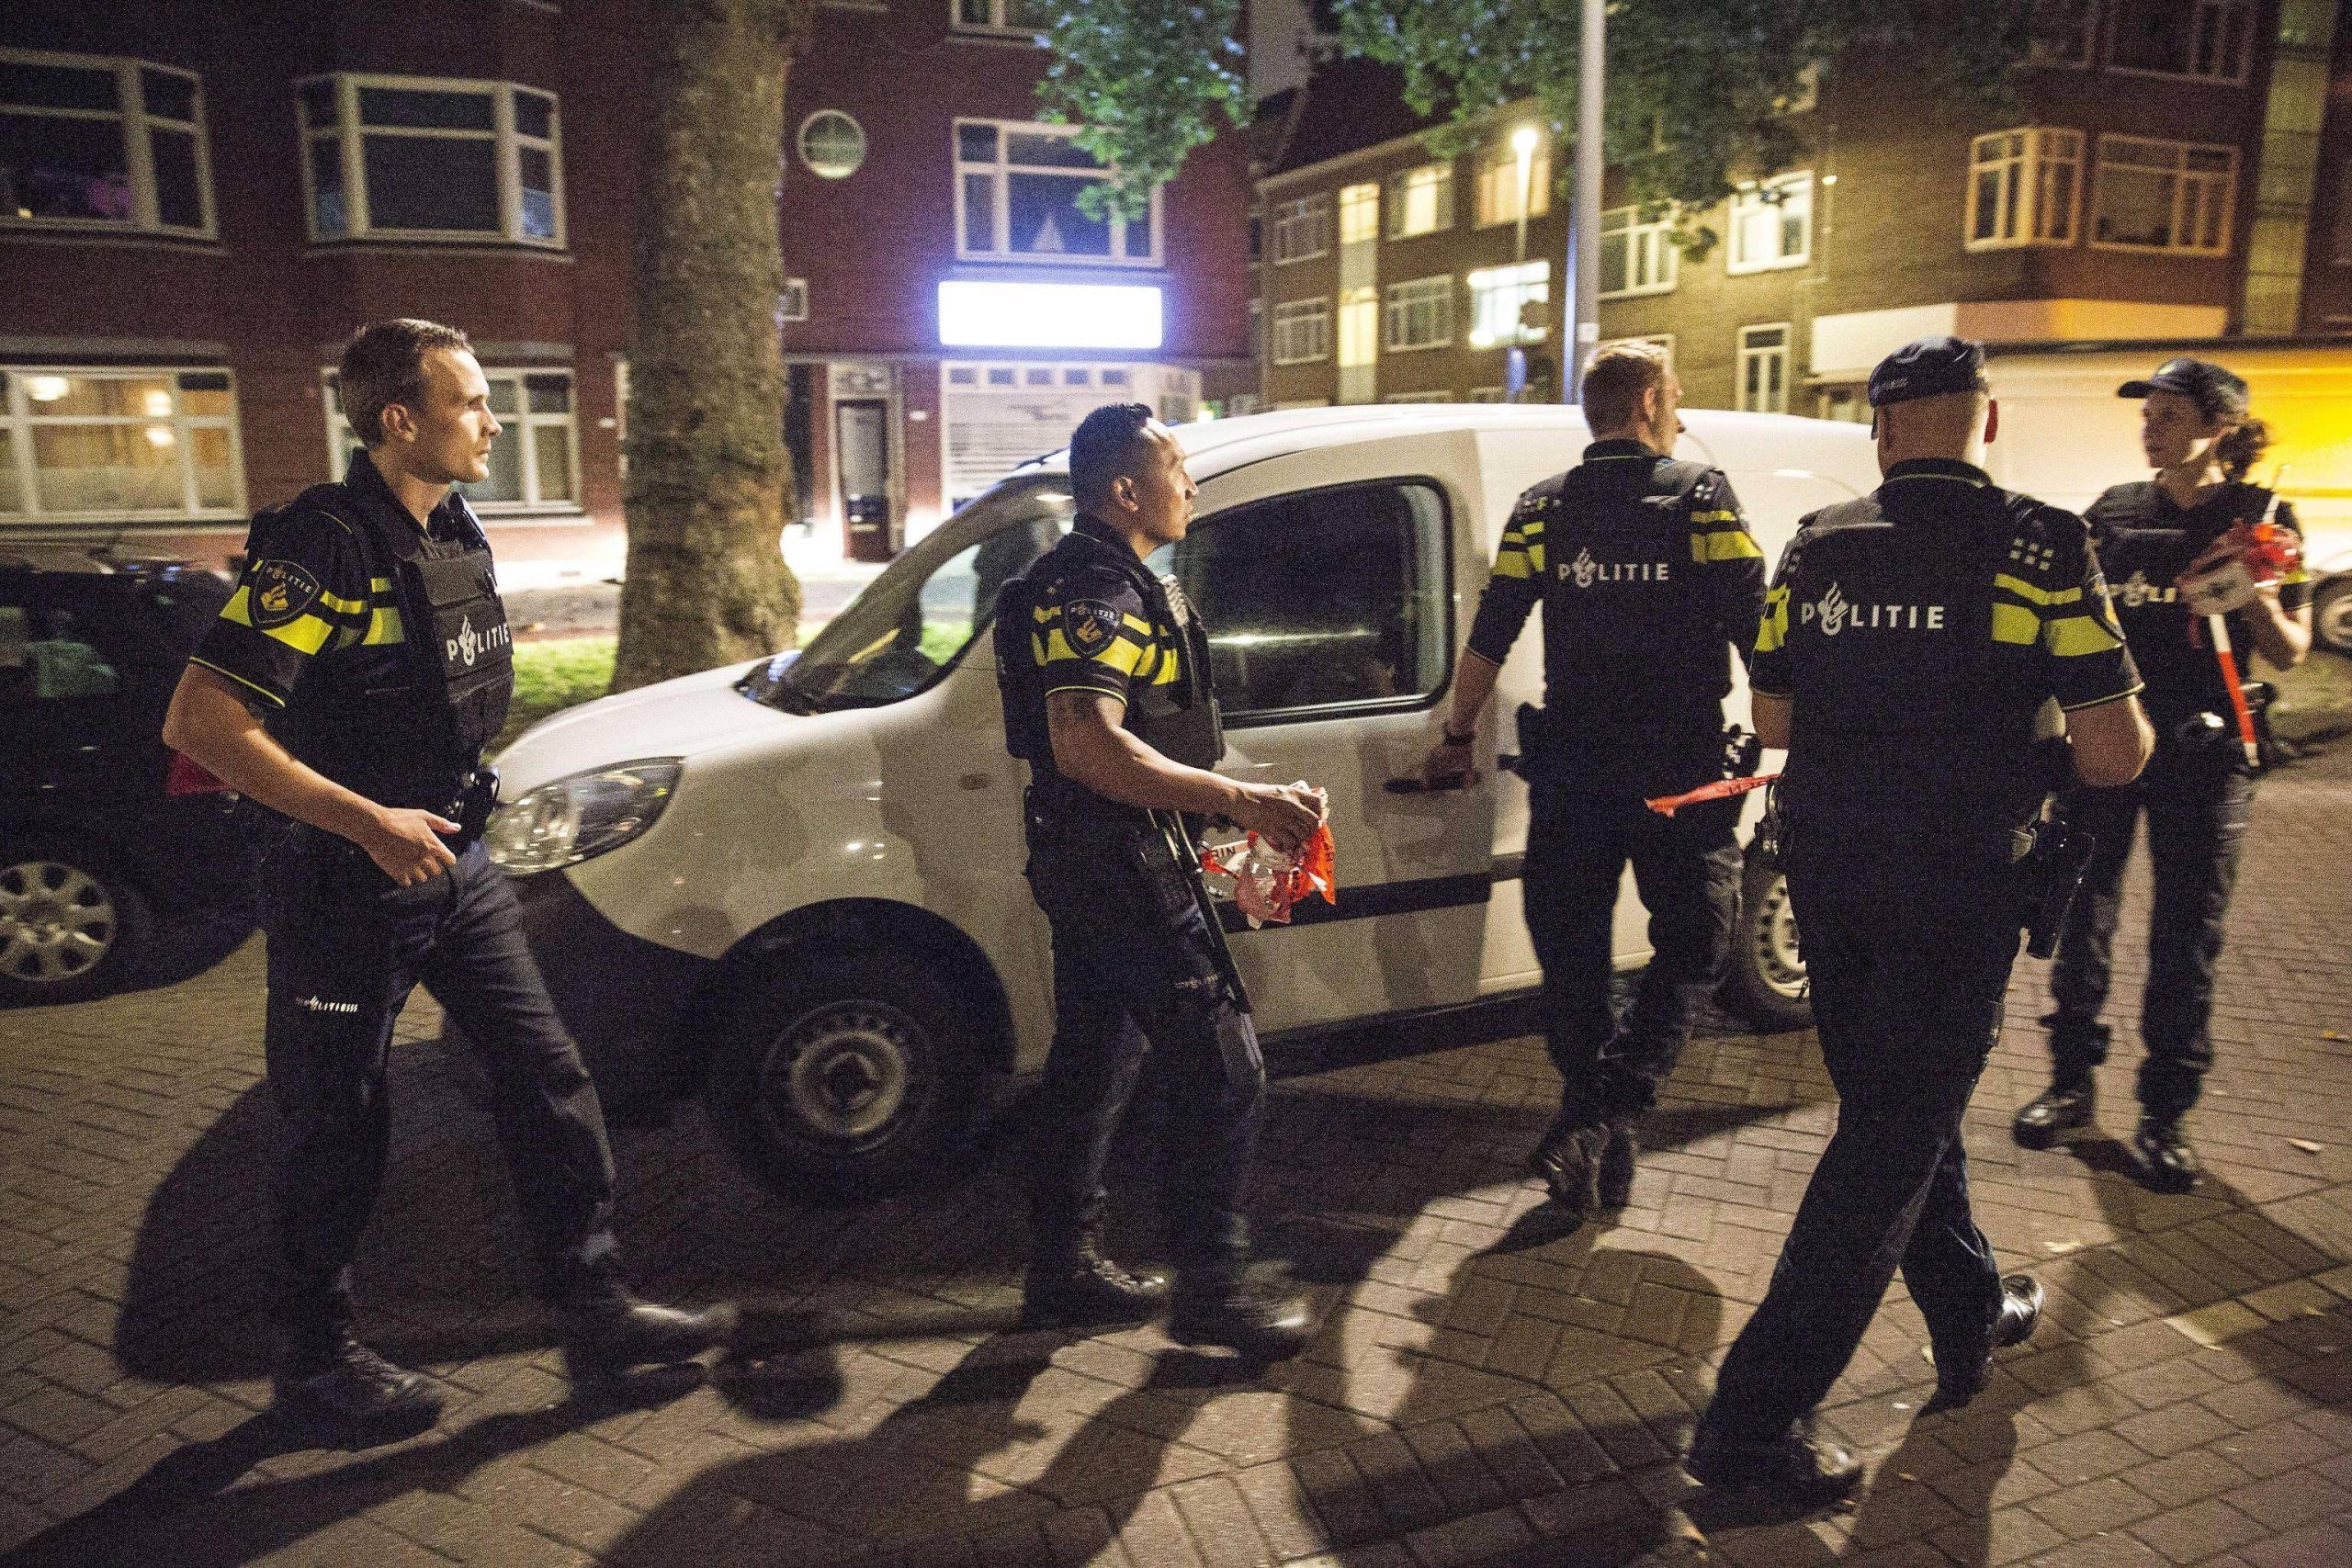 Terror threat after a van packed with gas canisters found in Rotterdam